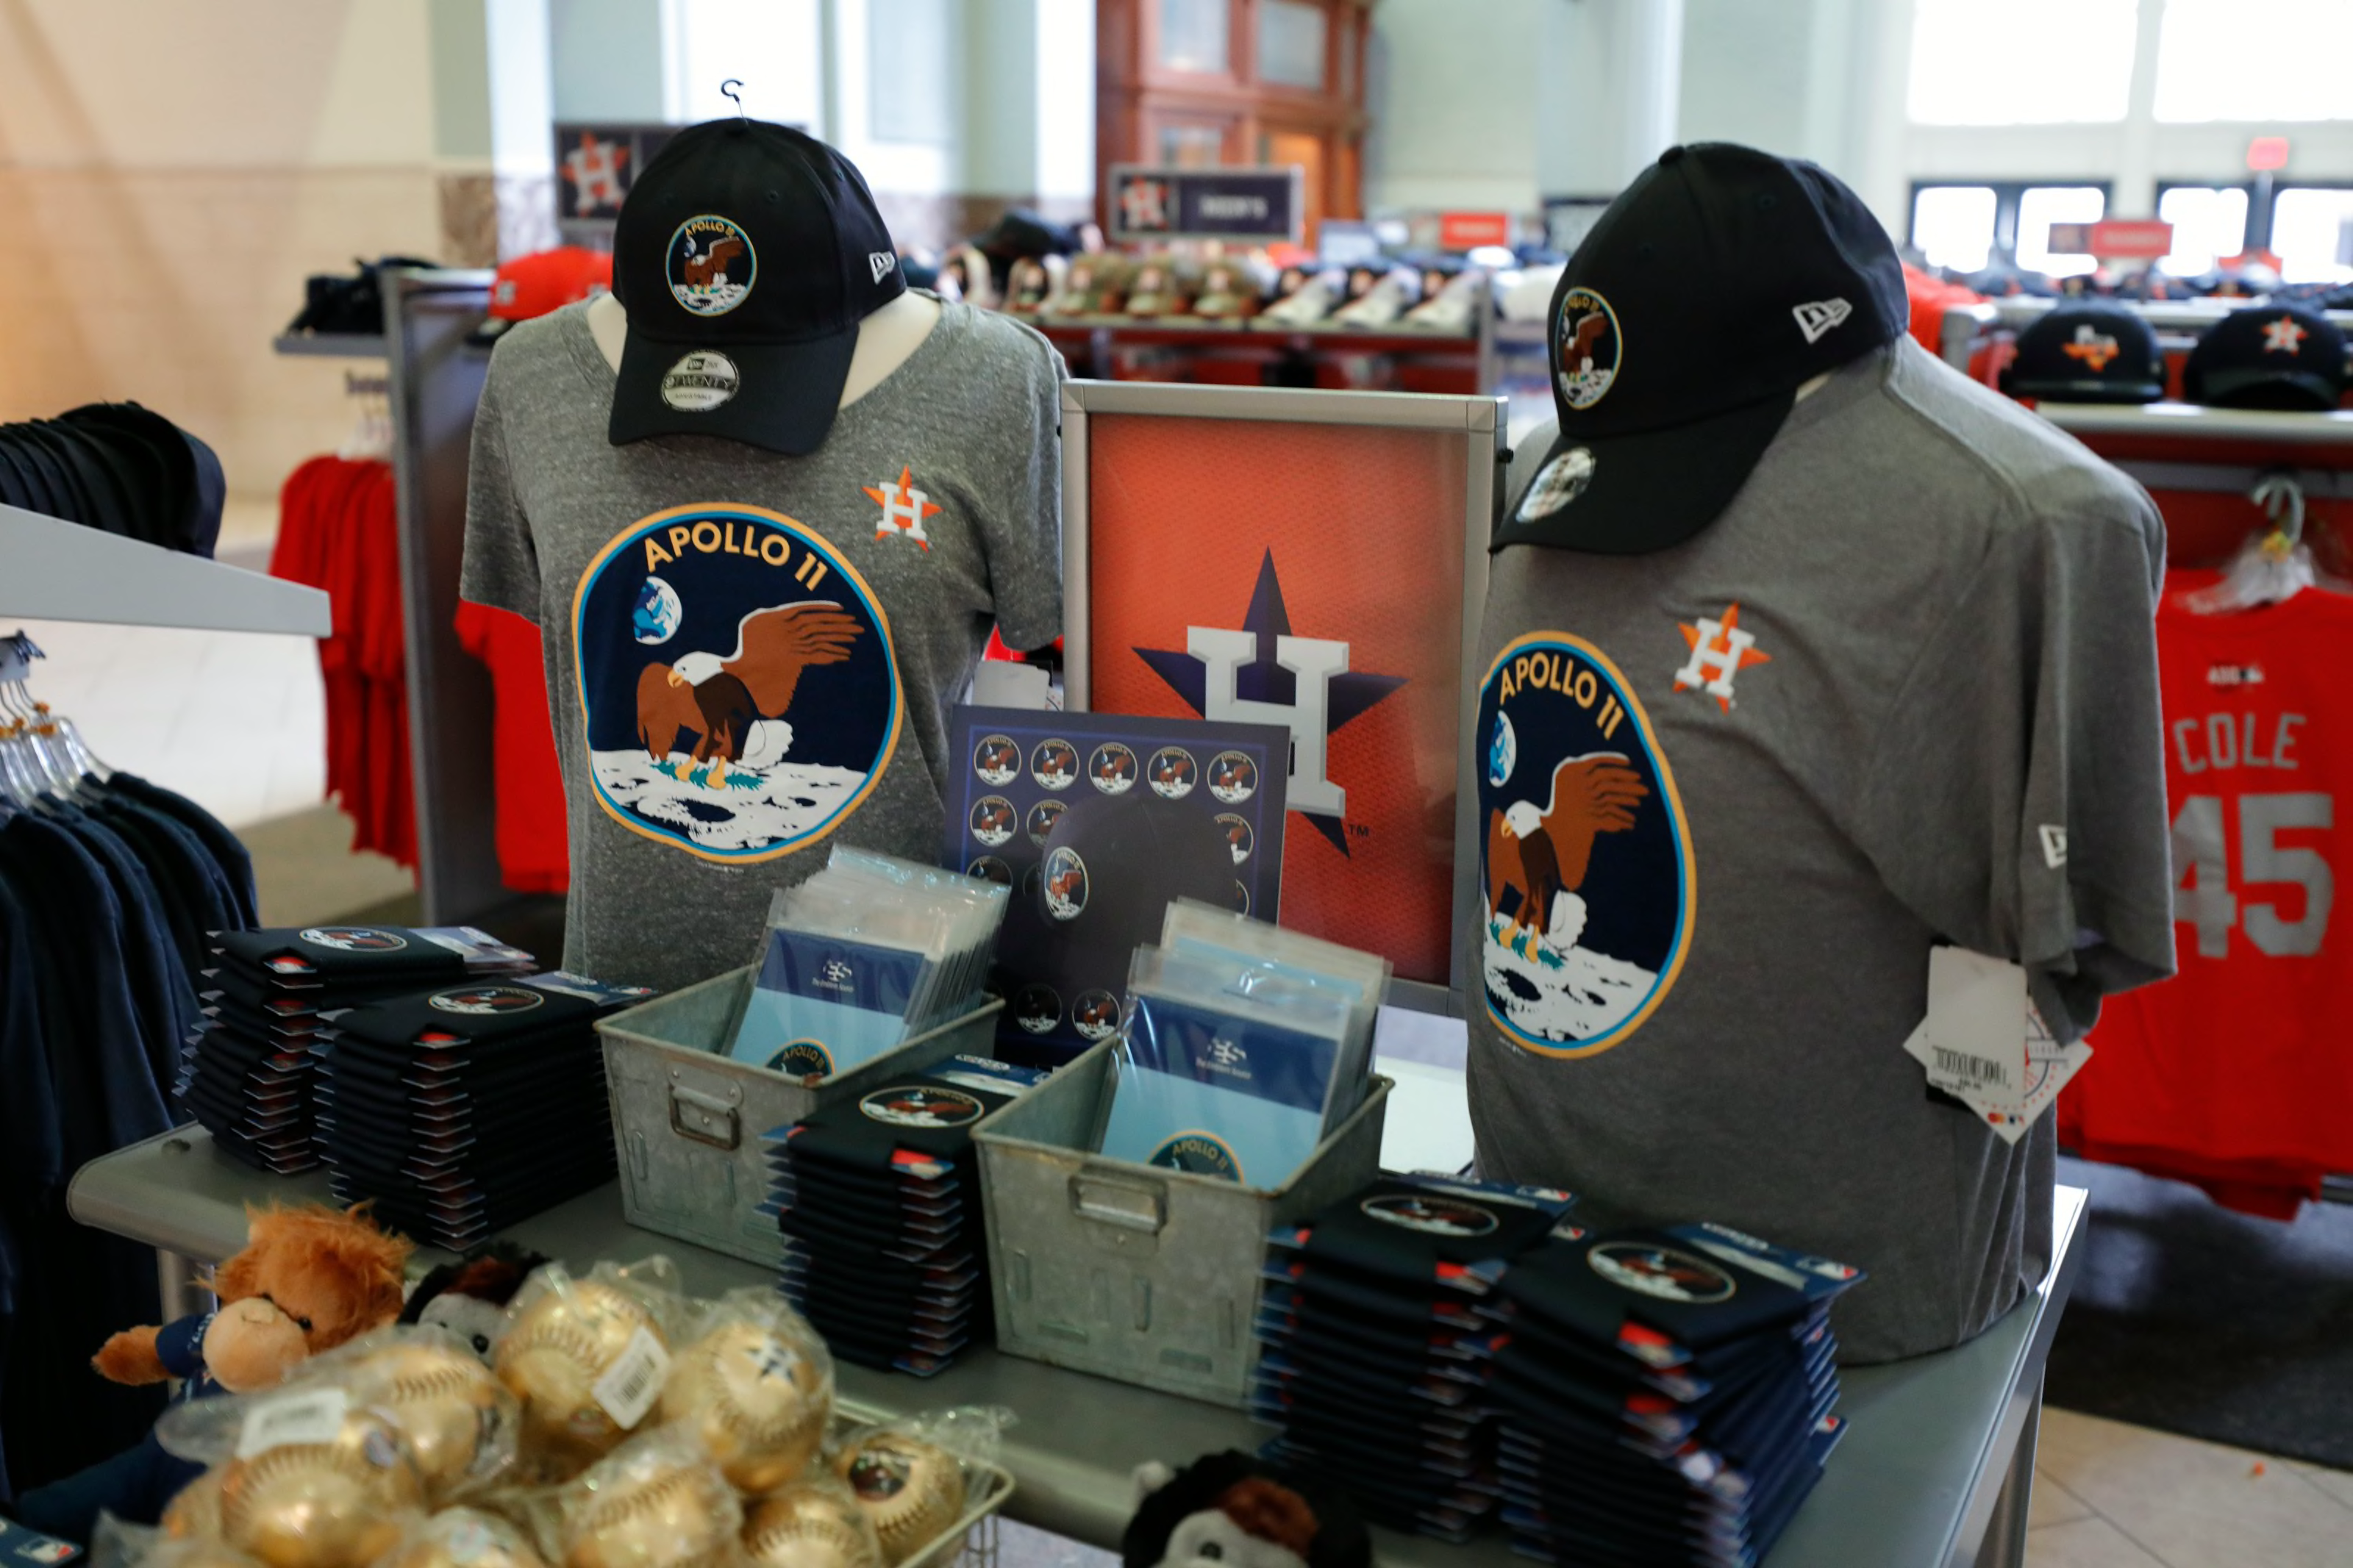 Houston Astros - More Space City gear has just landed